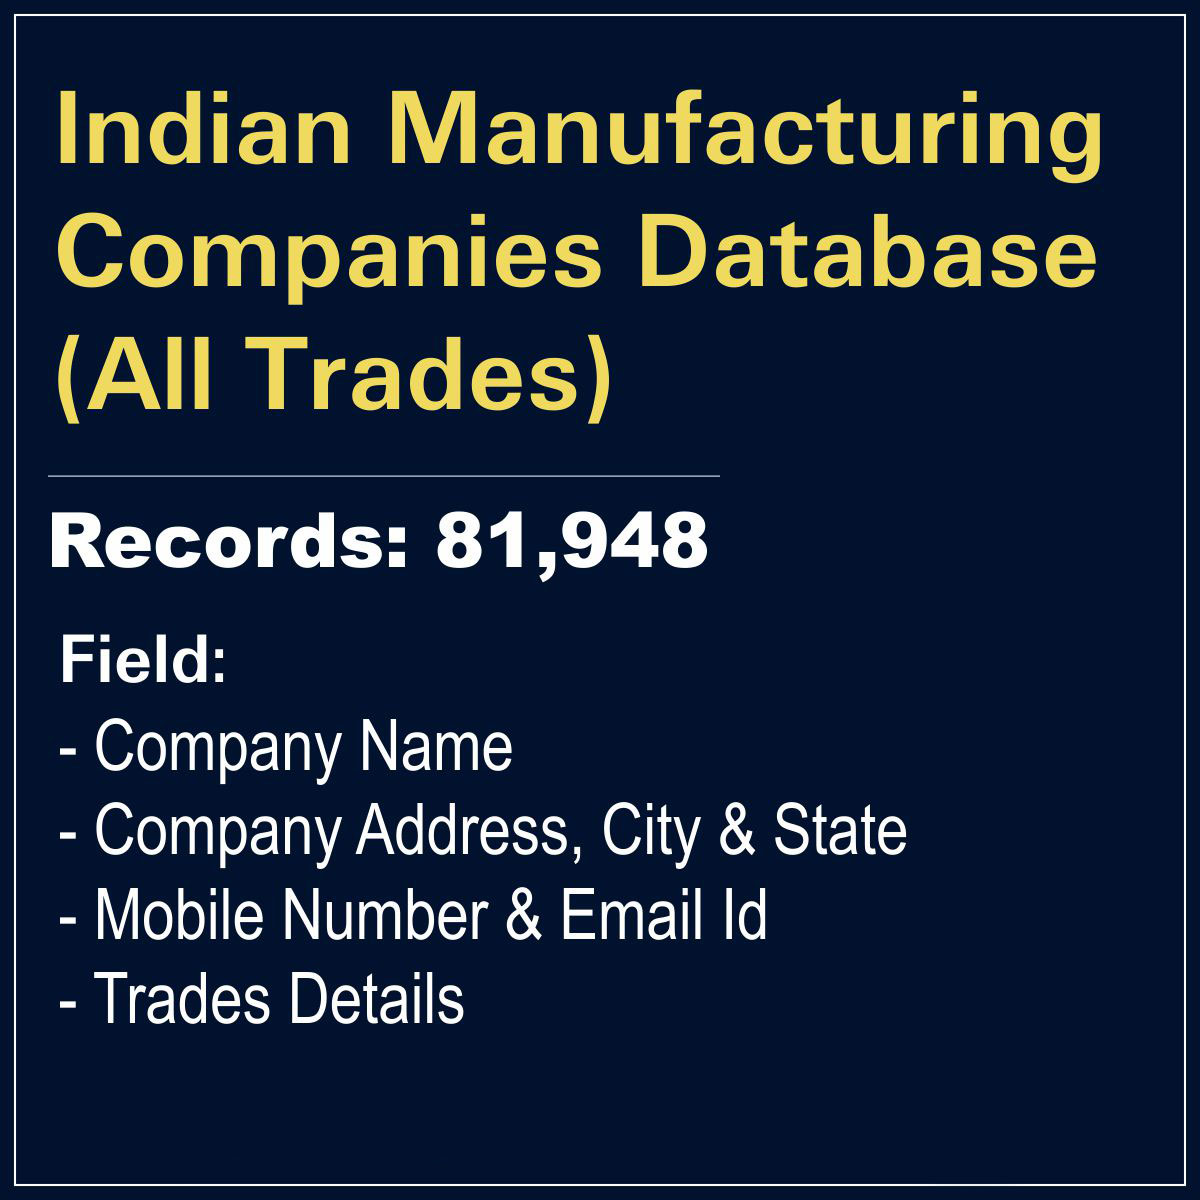 Indian Manufacturing Companies Database